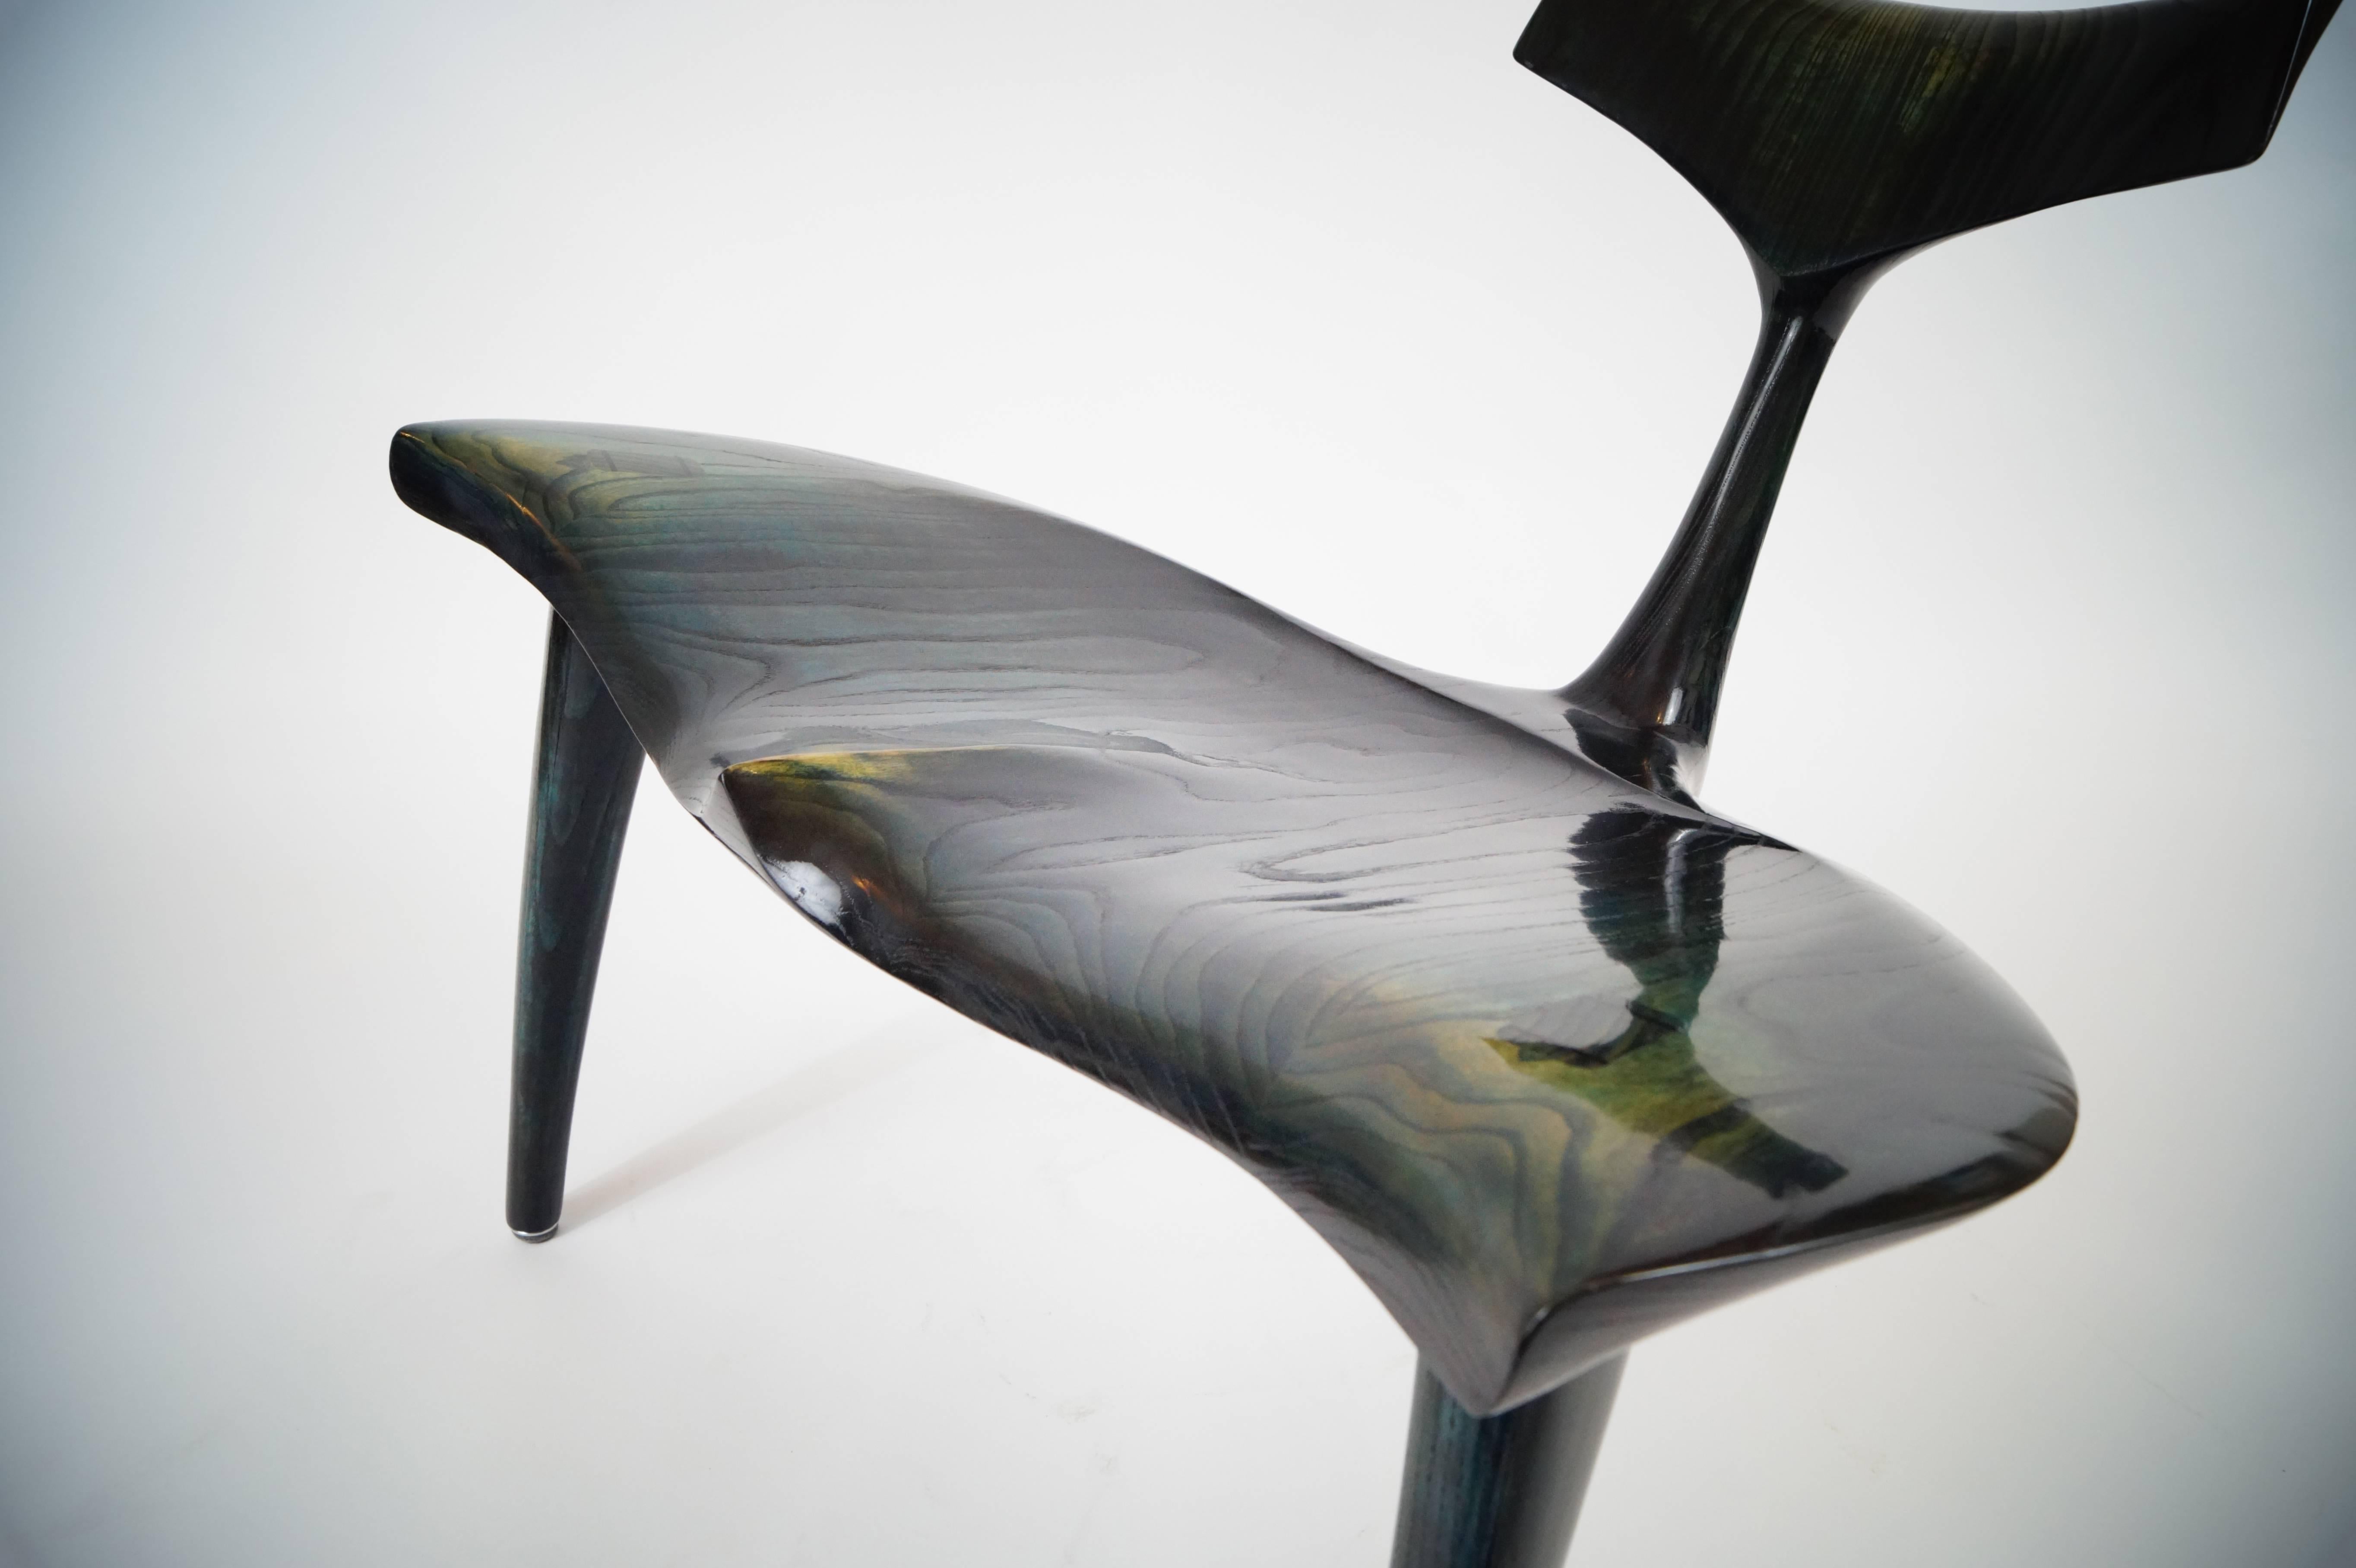 Walnut Art Whale Chair MS82 Handcrafted and Designed by Morten Stenbaek